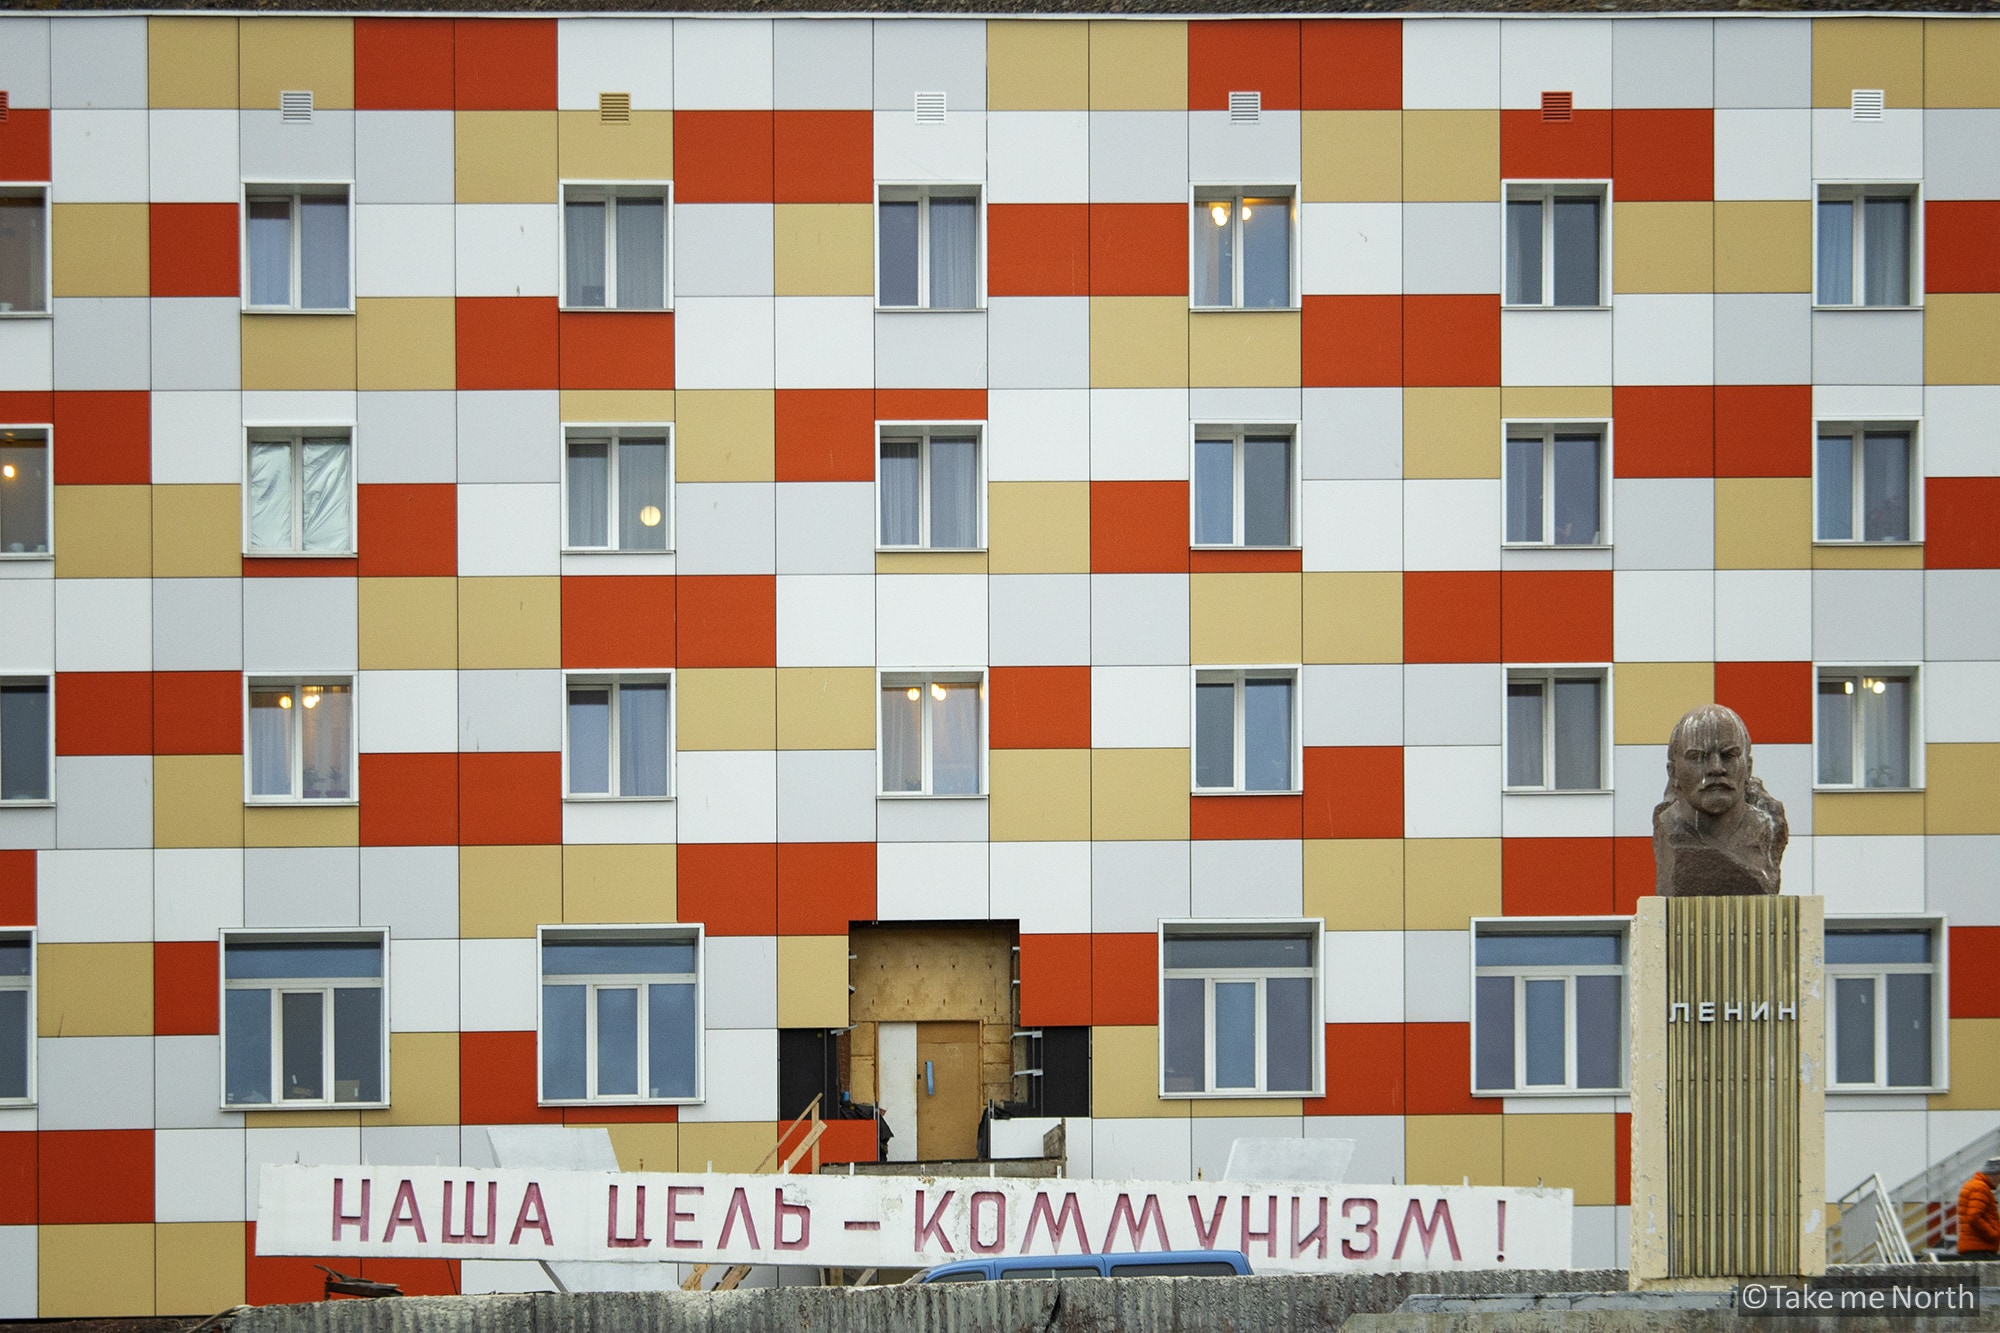 One of the residential buildings that recently got a facelift, while Lenin still oversees the square